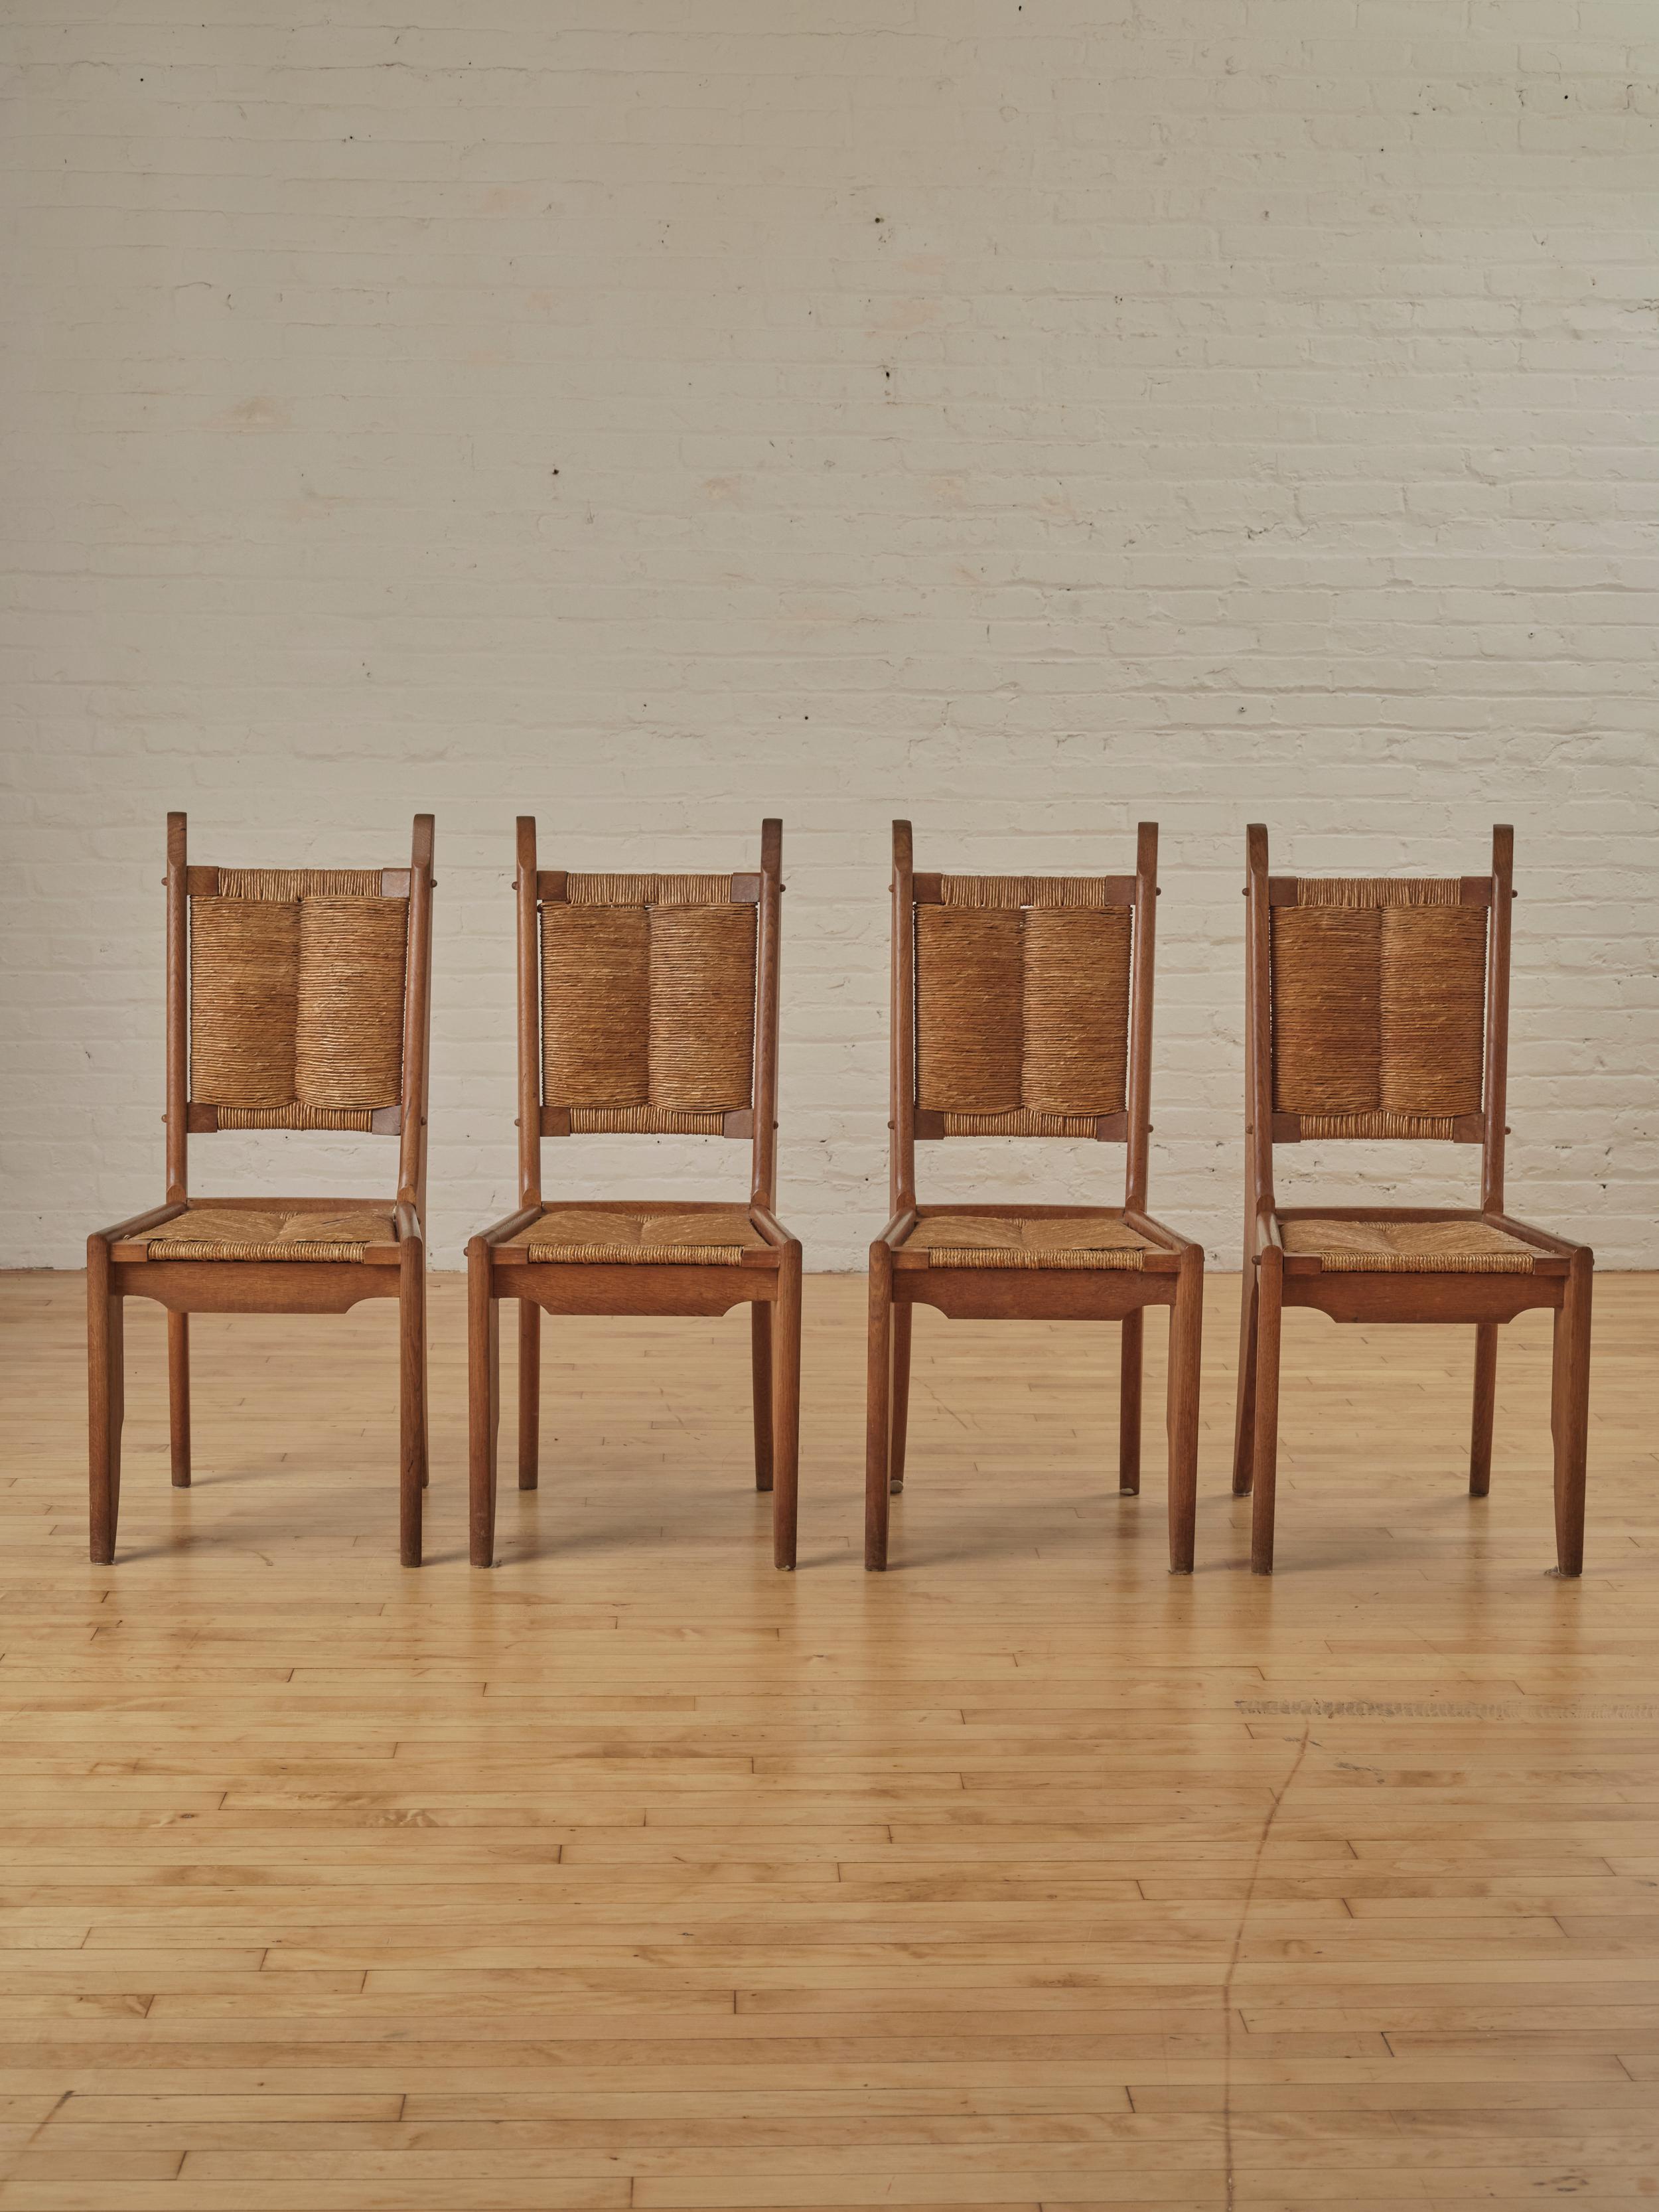 A set of four dining chairs in oakwood and straw, designed by Guillerme and Chambron for Notre Maison in the 1950s

